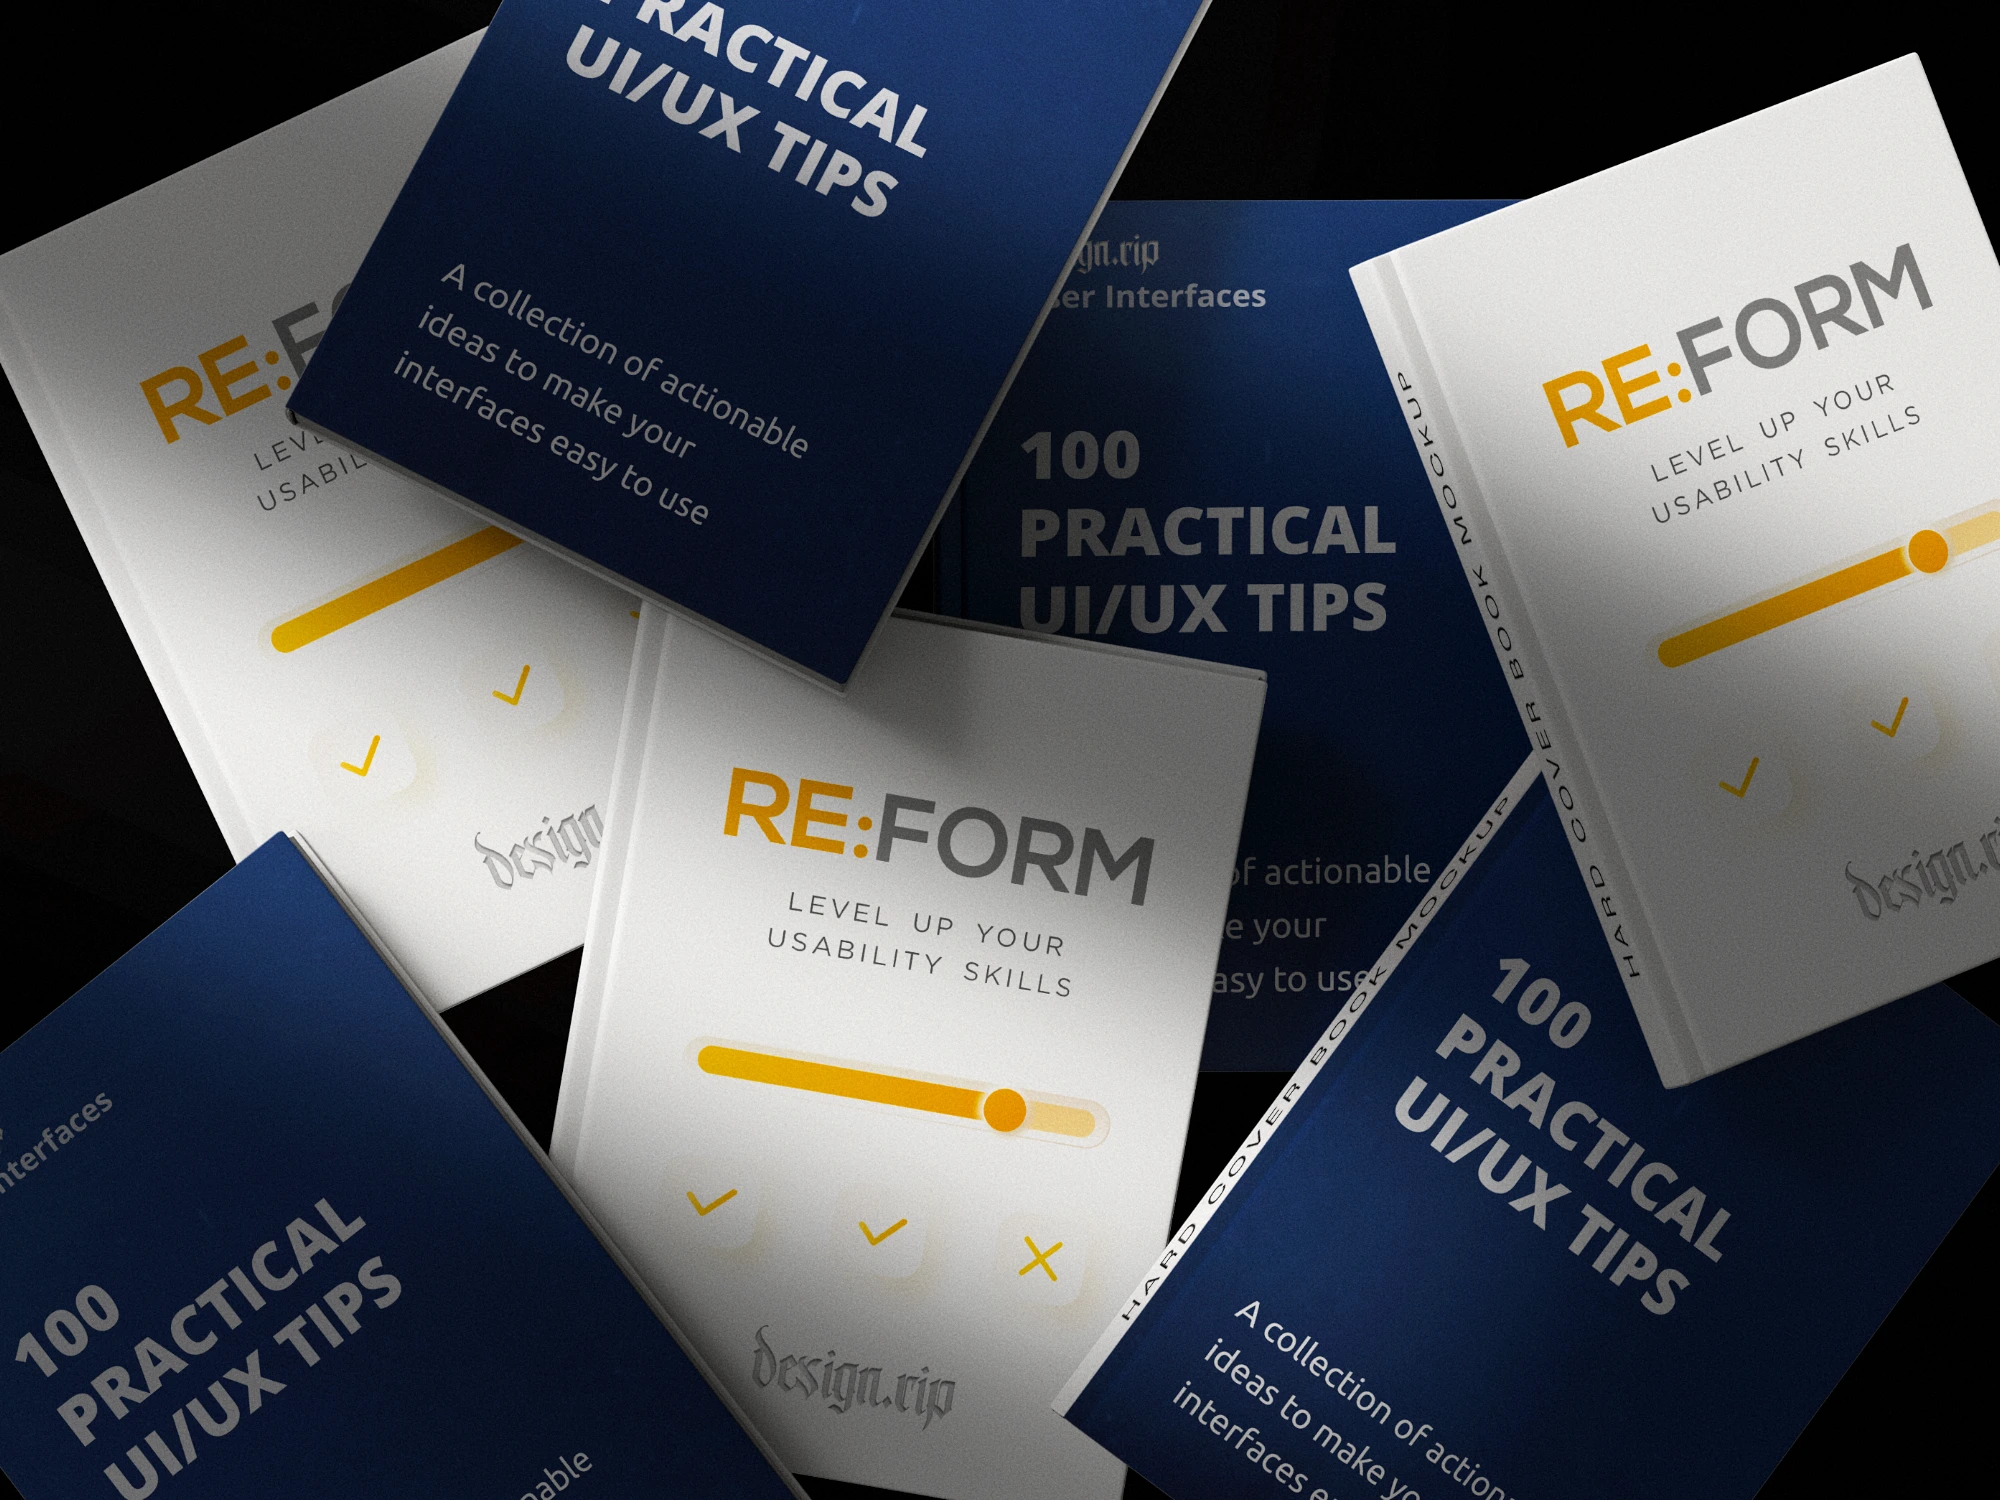 [VIP] Re:Form: Learn how to improve usability of your forms